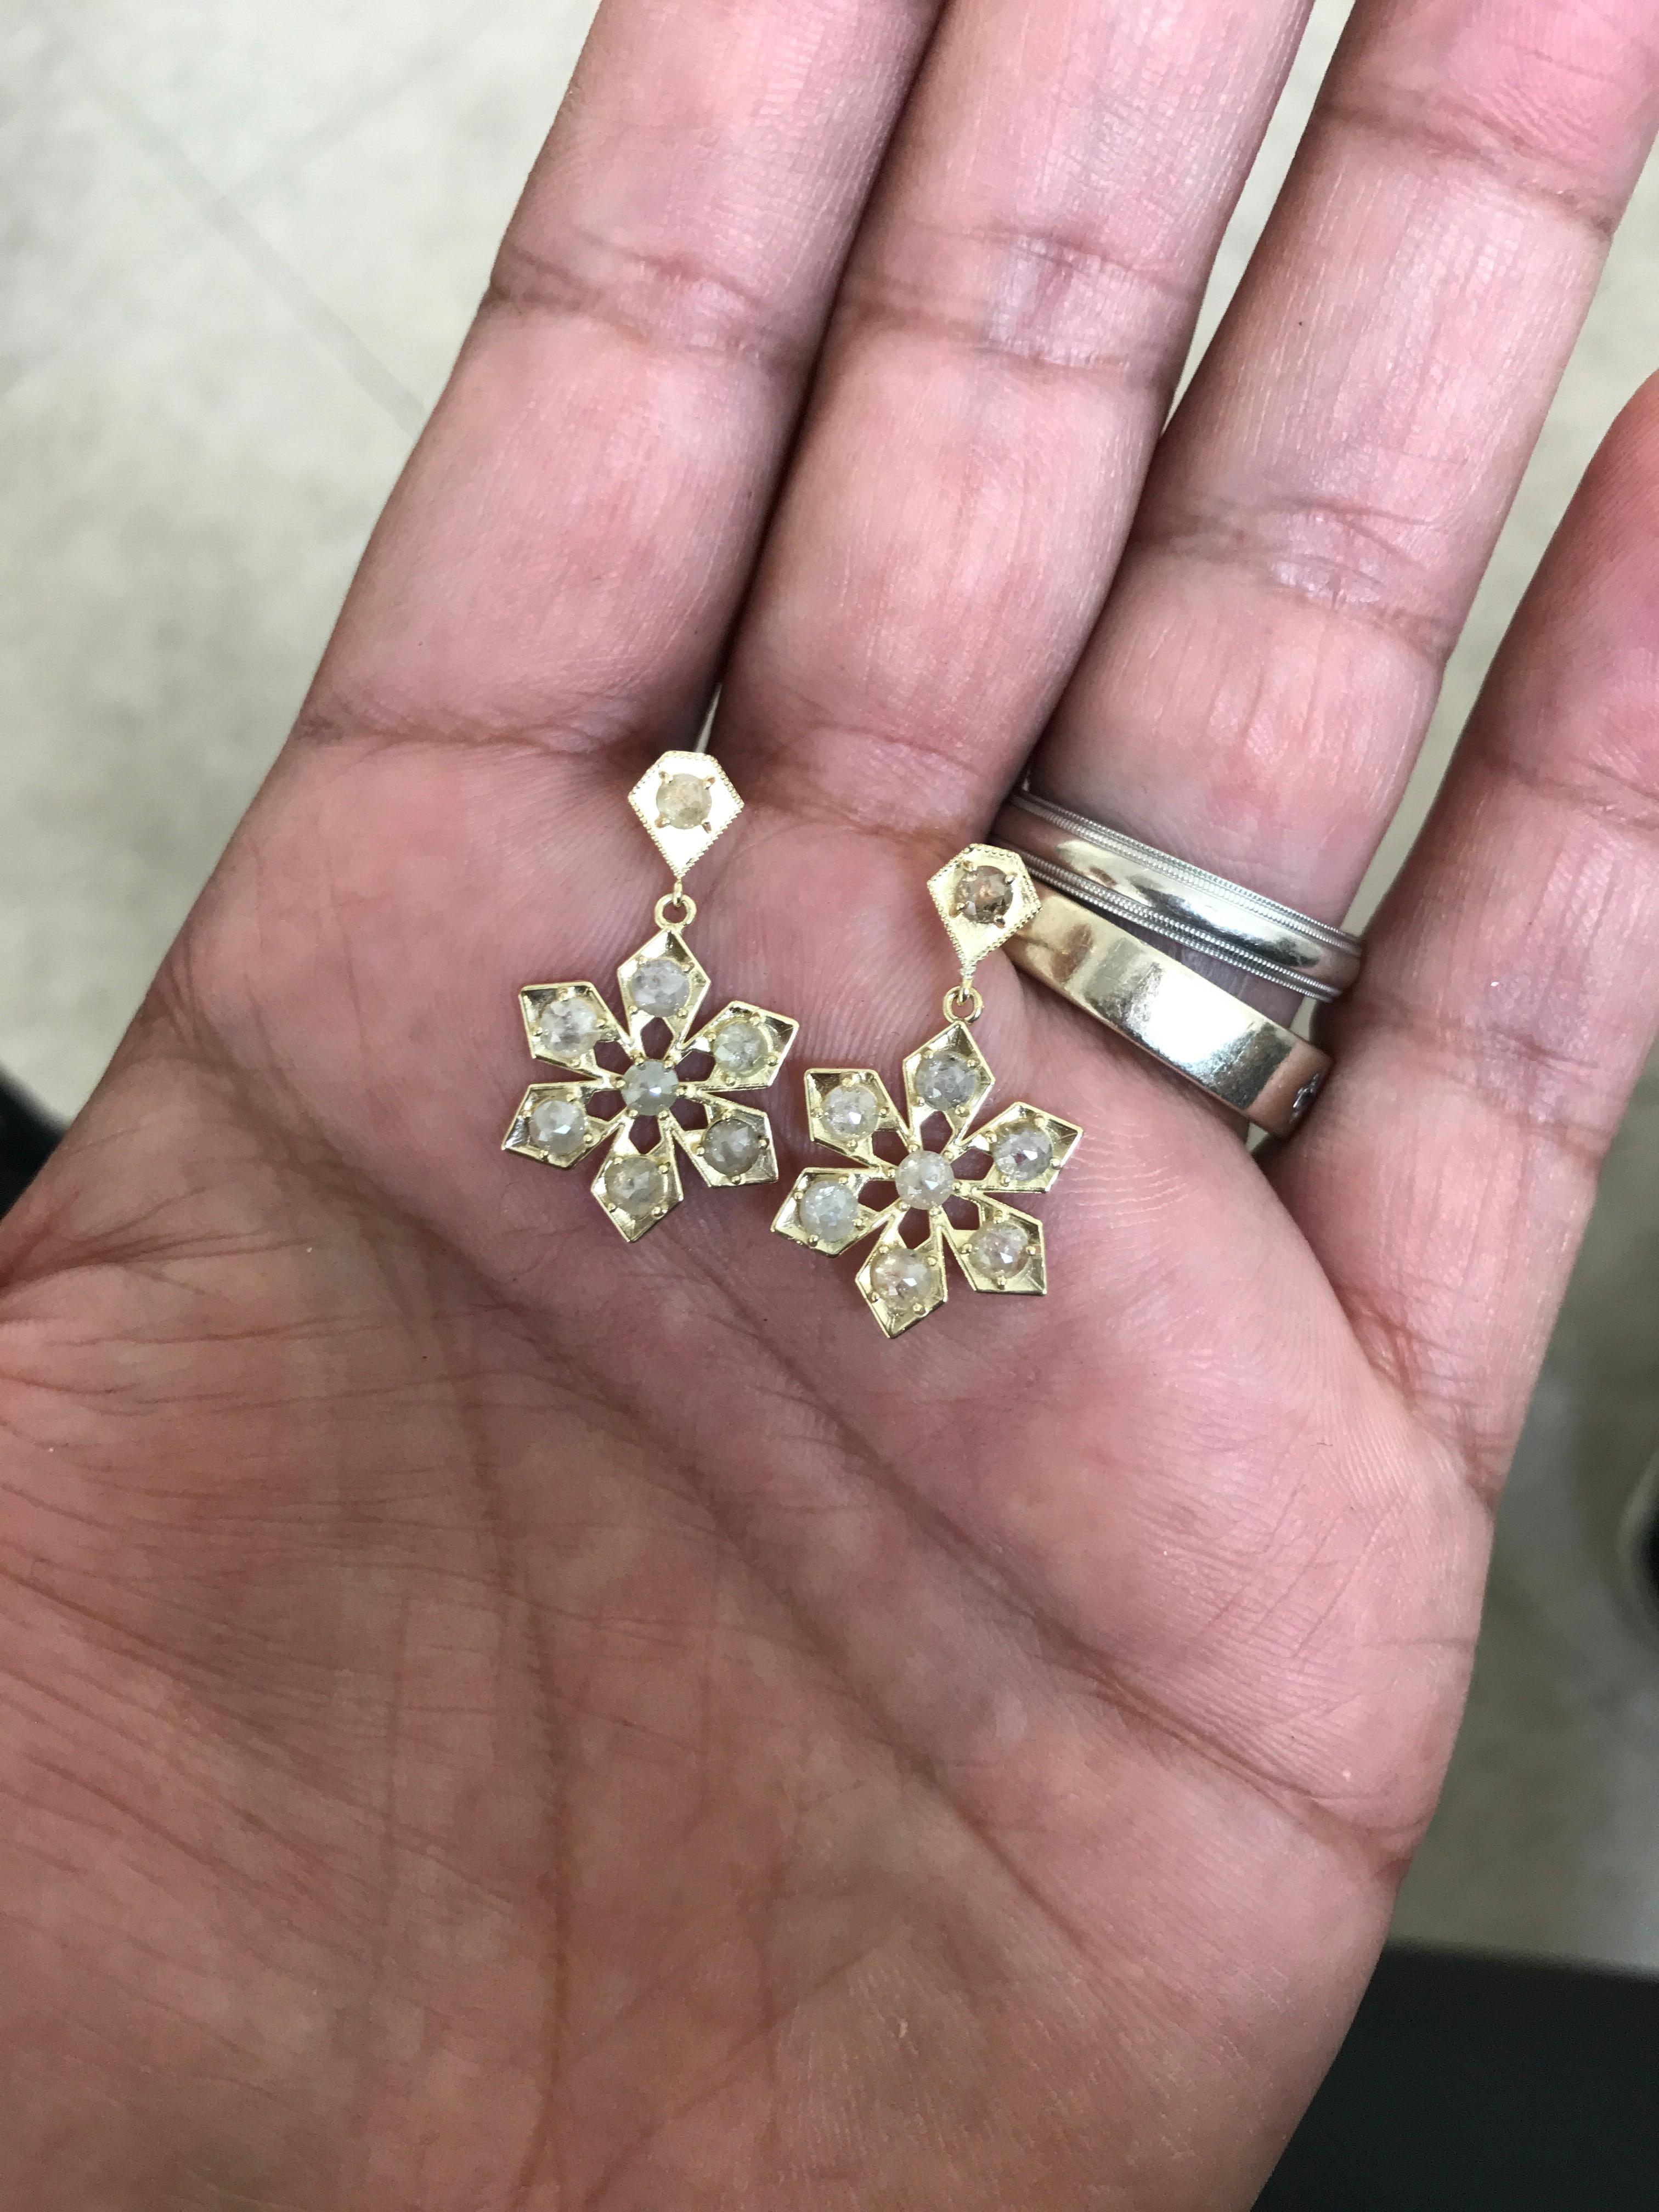 Spear Florette Rose Cut Diamond Pendant Post Earrings in 18k Yellow gold designed by Amyn The Jeweler.

16 Diamonds  2.46cts 

Made with passion in Los Angeles

Model:ERPFLRRDST 